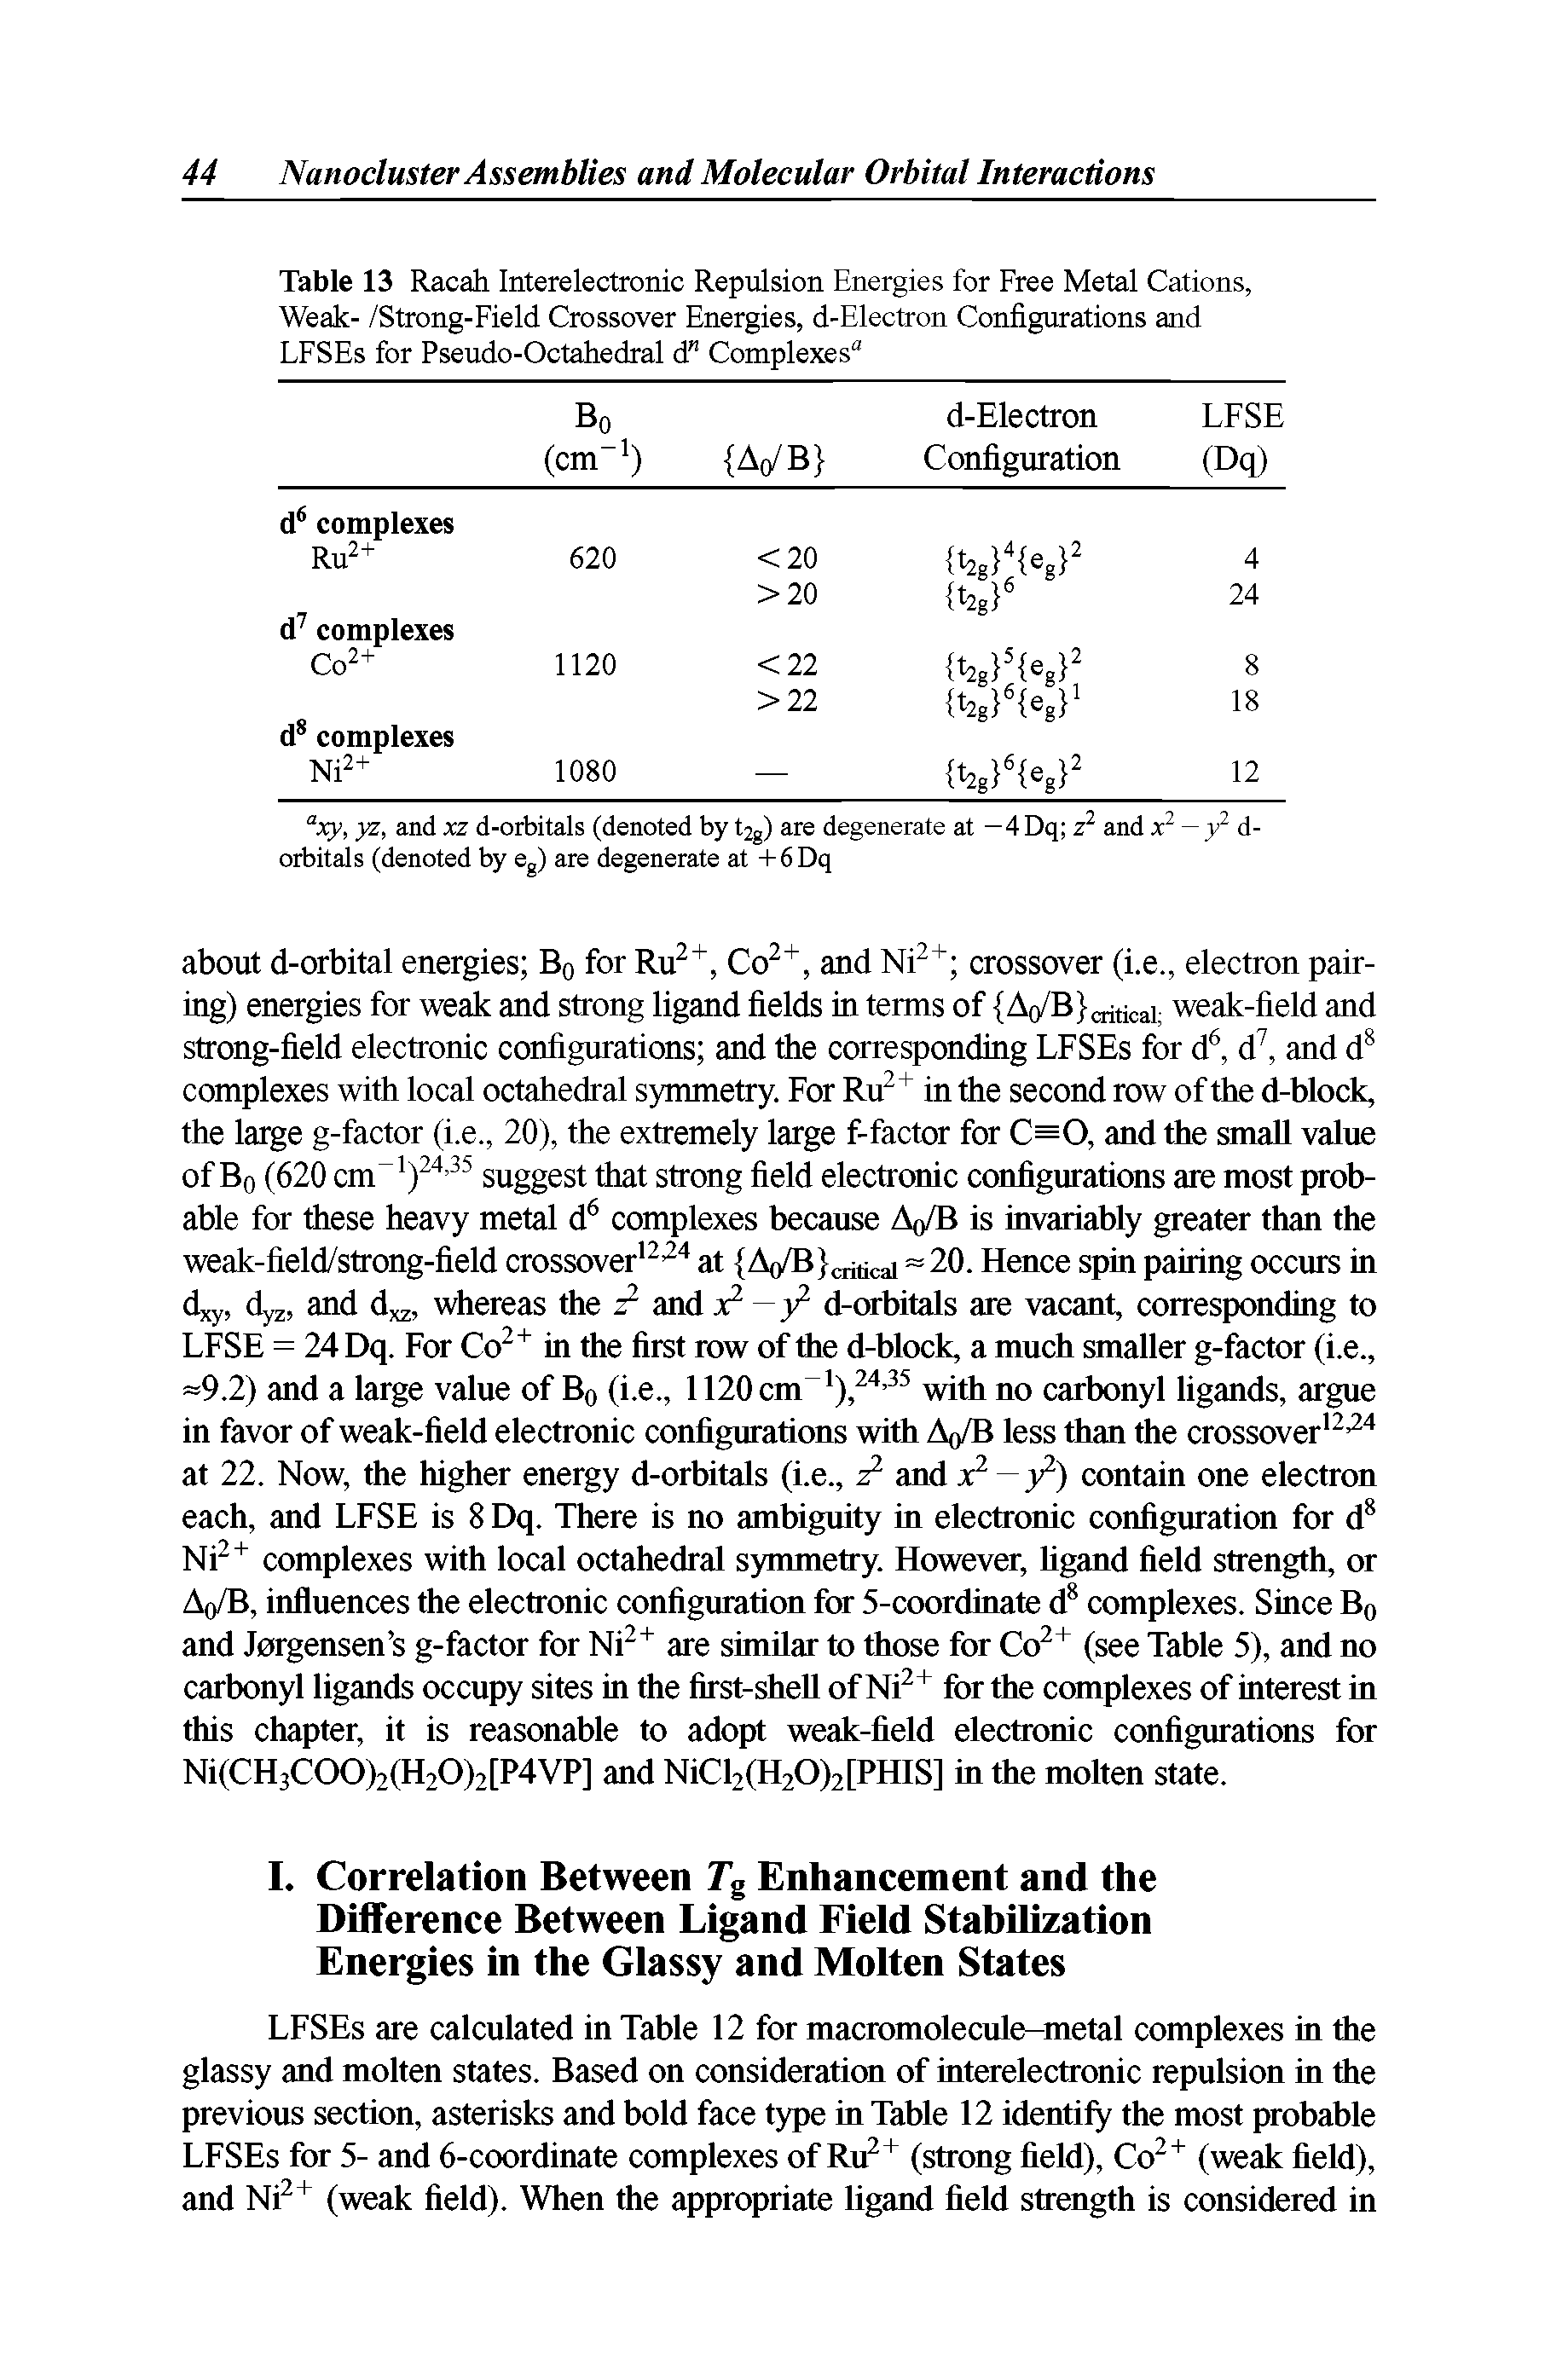 Table 13 Racah Interelectronic Repulsion Energies for Free Metal Cations, Weak- /Strong-Field Crossover Energies, d-Electron Configurations and LFSEs for Pseudo-Octahedral d" Complexes"...